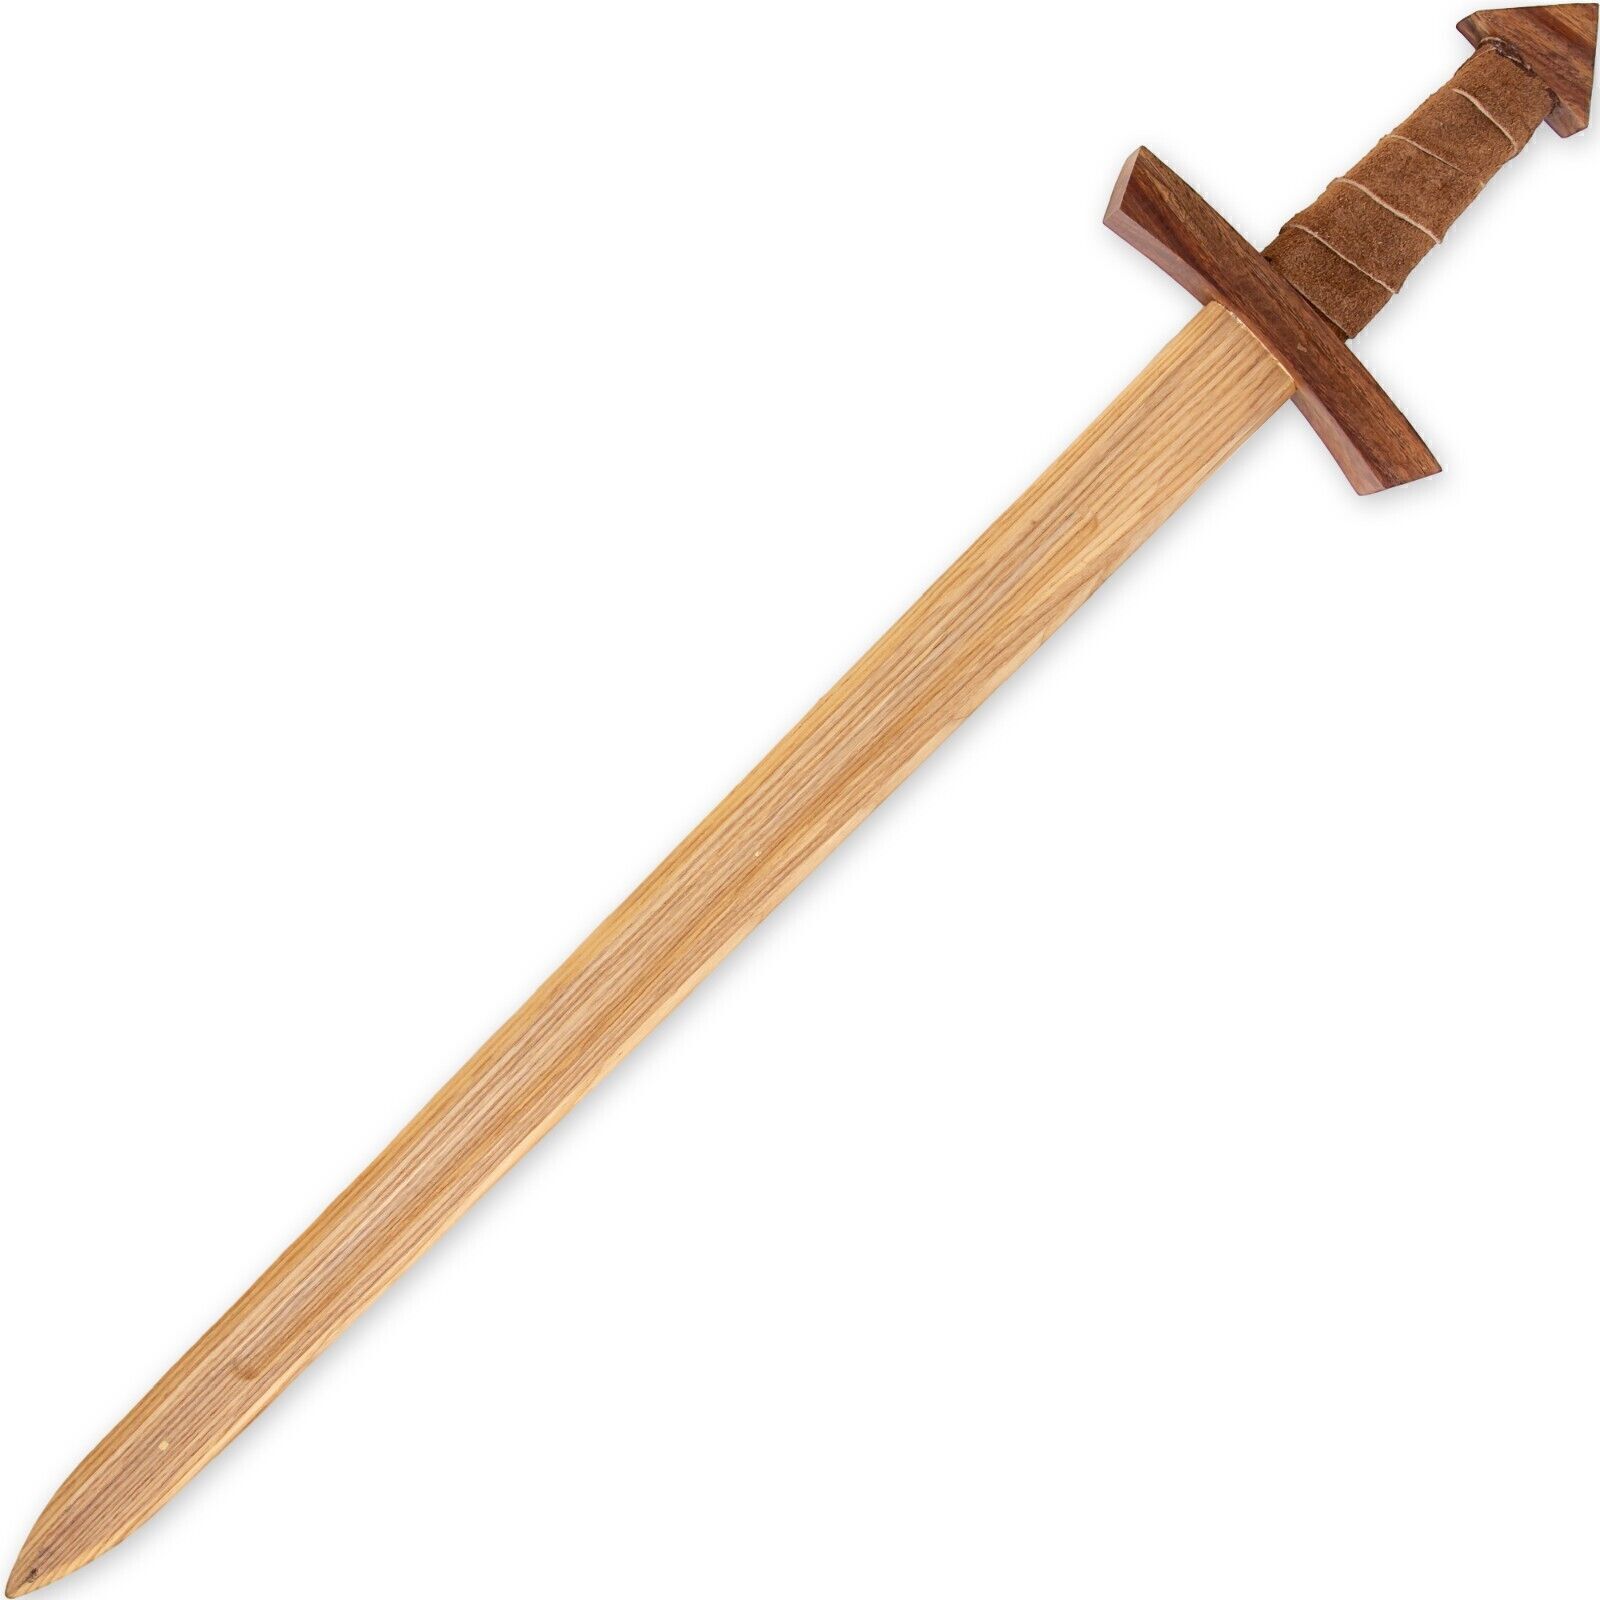 Beech Wood Pretend Play Practice Training Wooden Arming Sword w/ Leather Handle